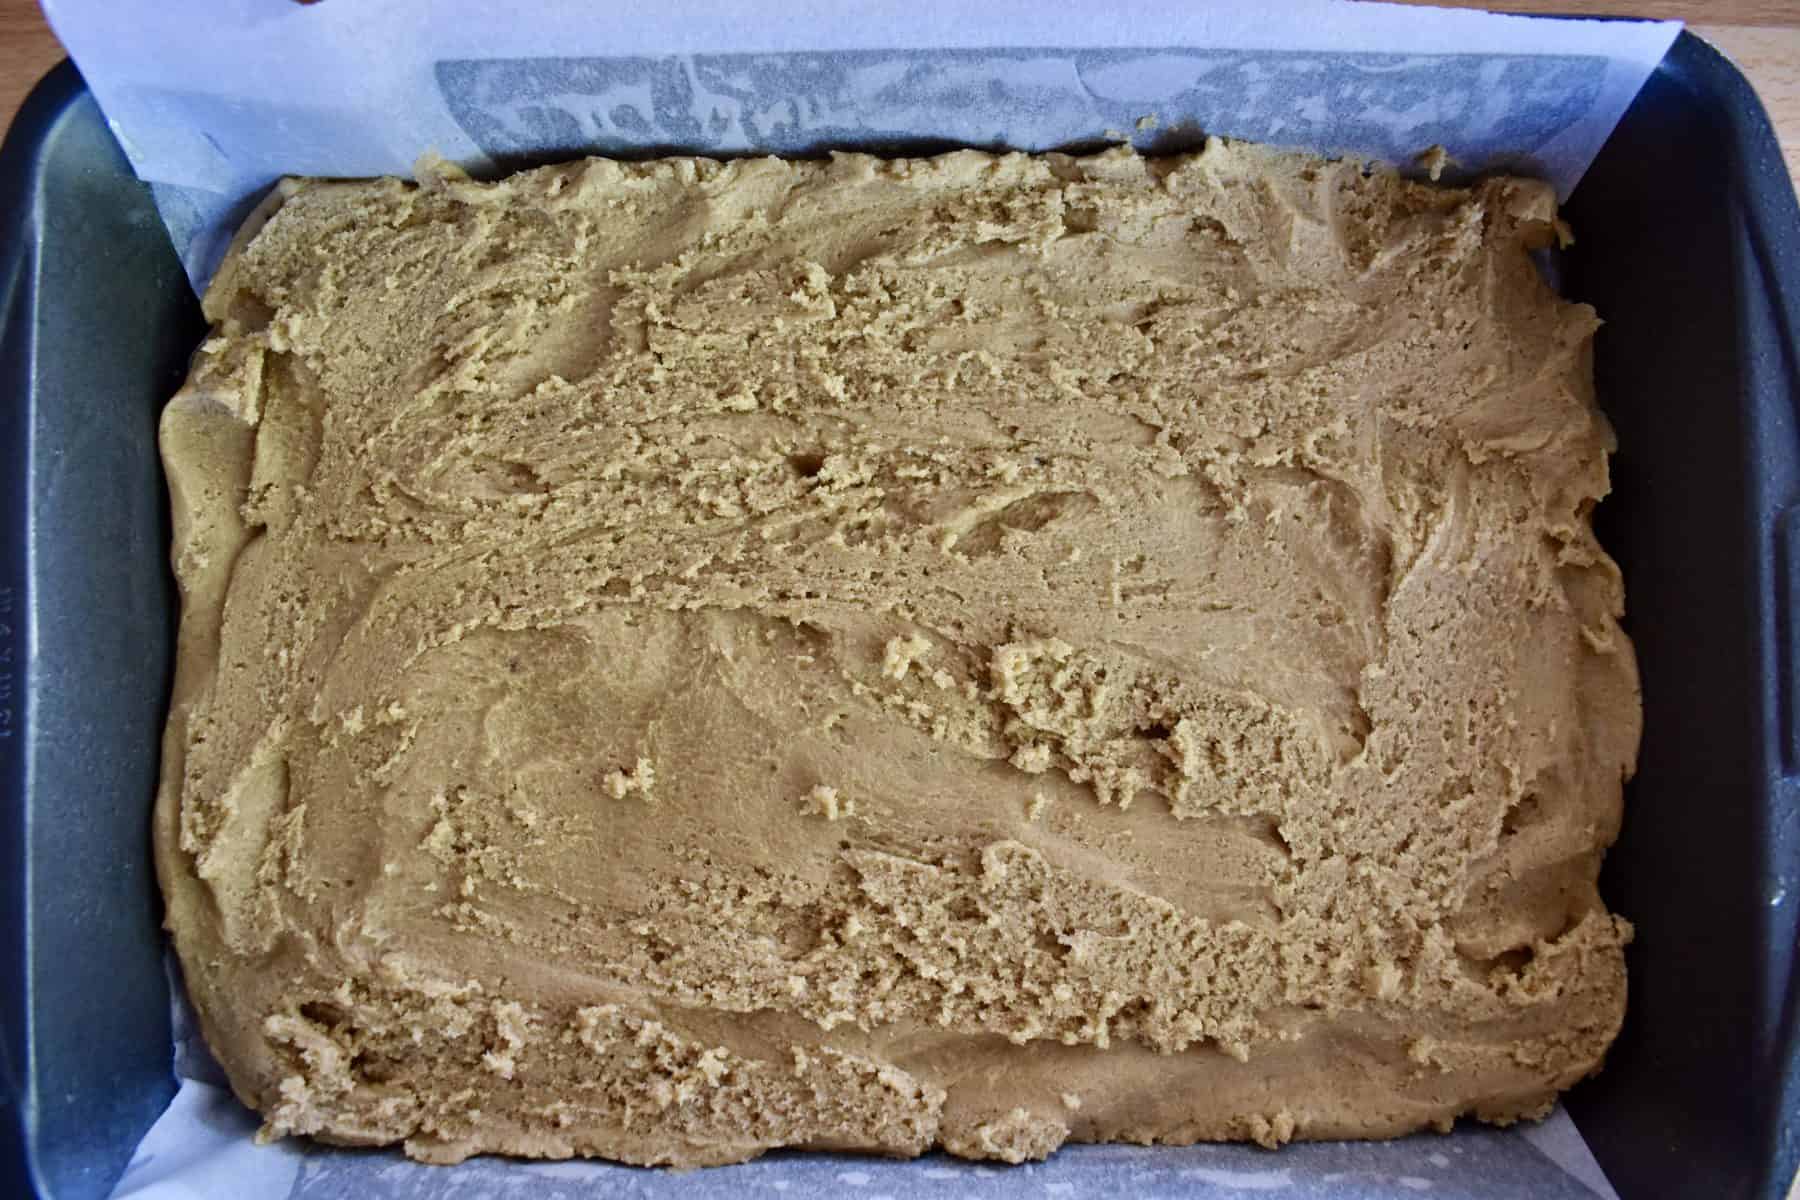 batter spread into the bottom of prepared baking pan. 